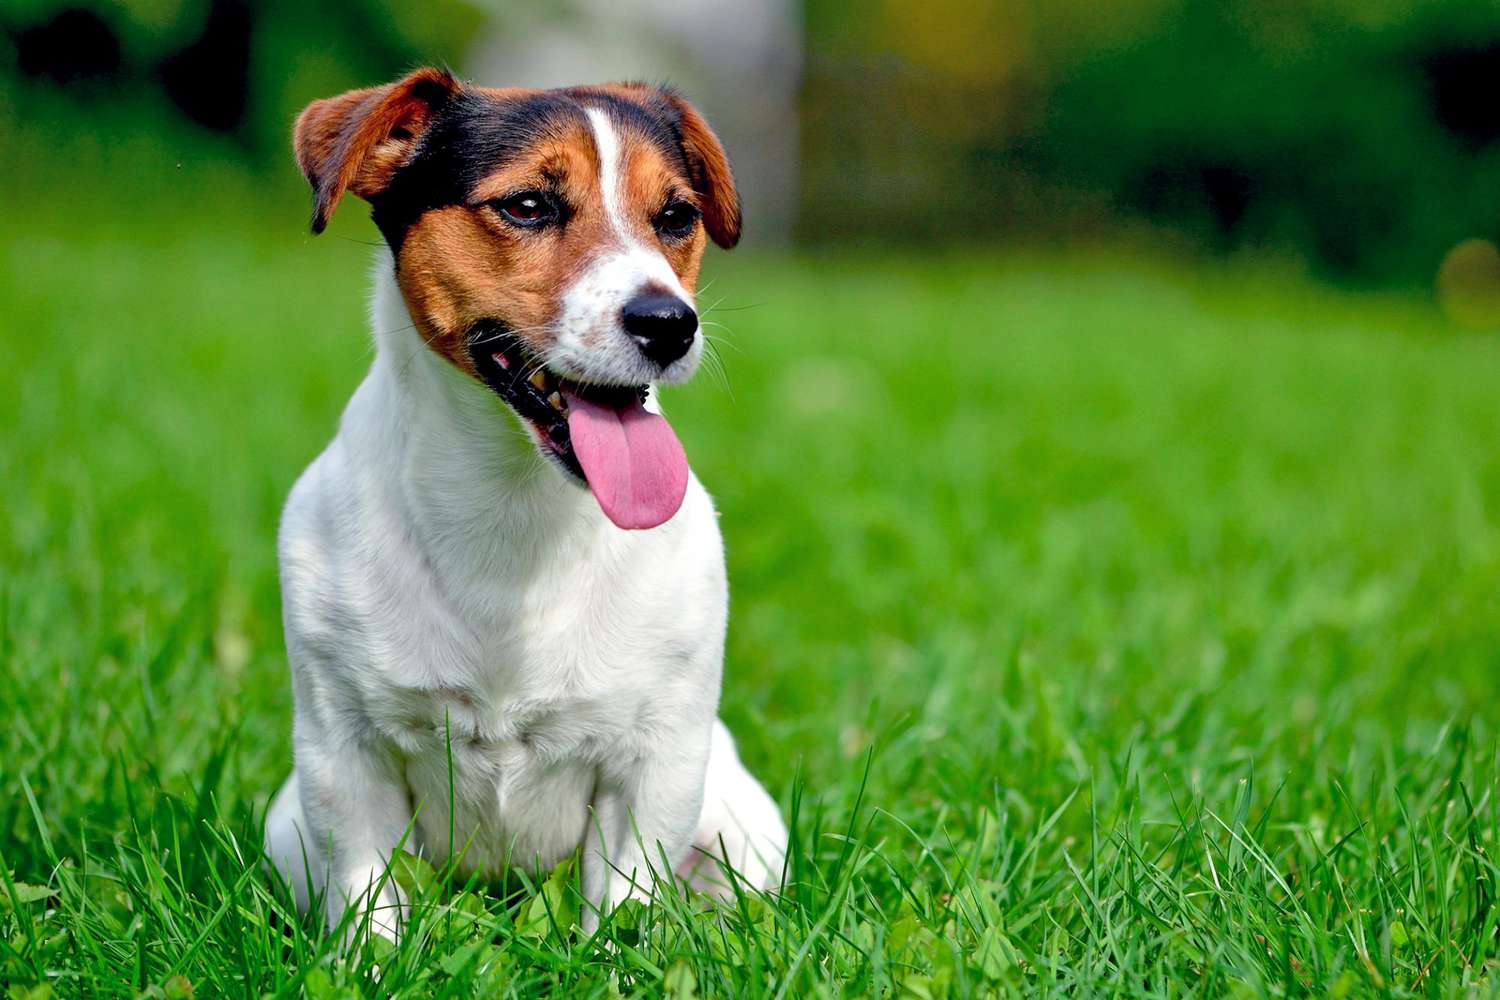 Jack Russell Terrier sitting in grass